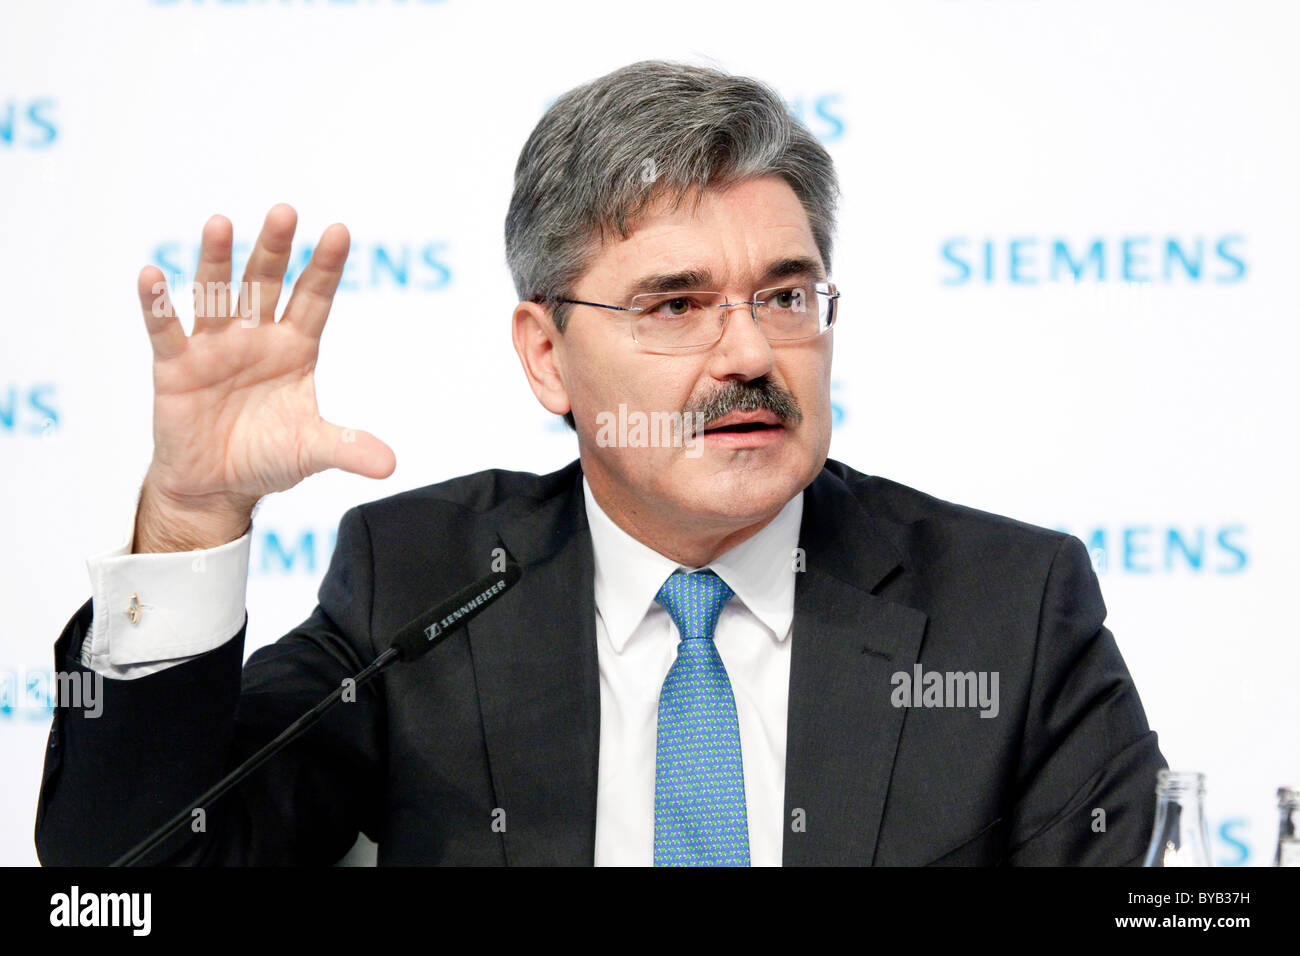 Jo Kaeser, Chief Financial Officer of Siemens AG, during the press conference on financial statements on 11.11.2010 in Munich Stock Photo